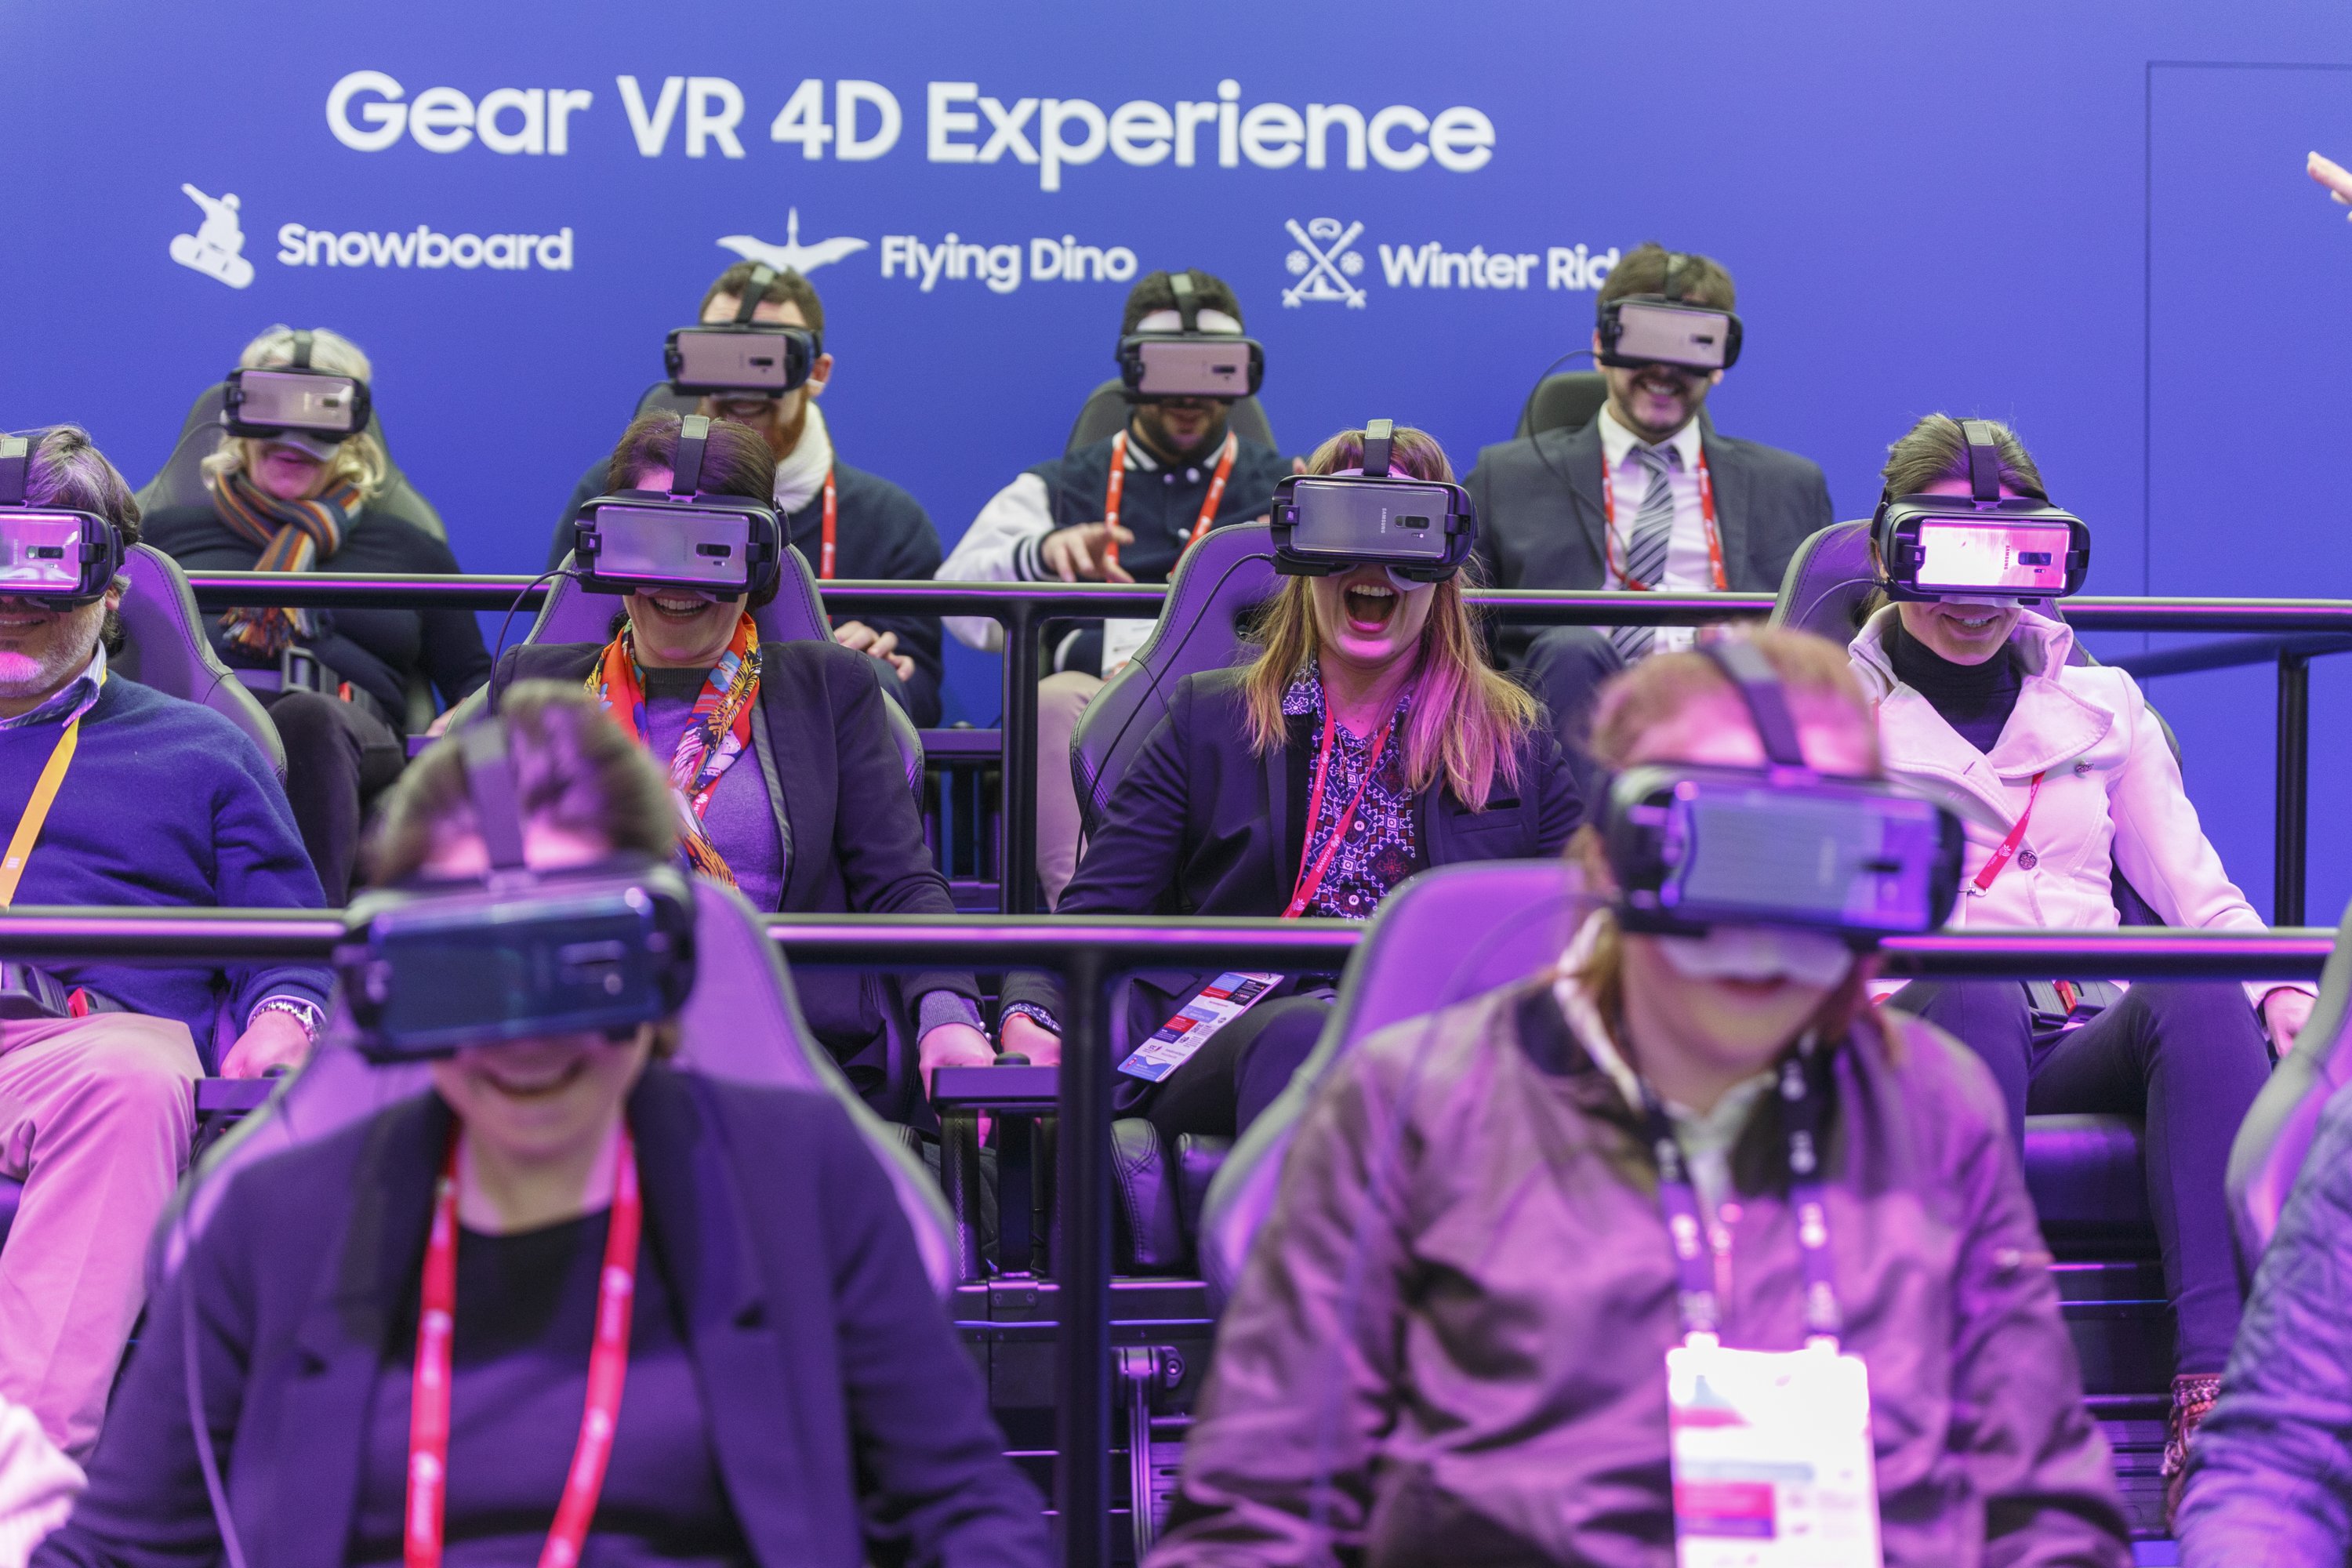 The highlights of the 2019 Mobile World Congress in Barcelona